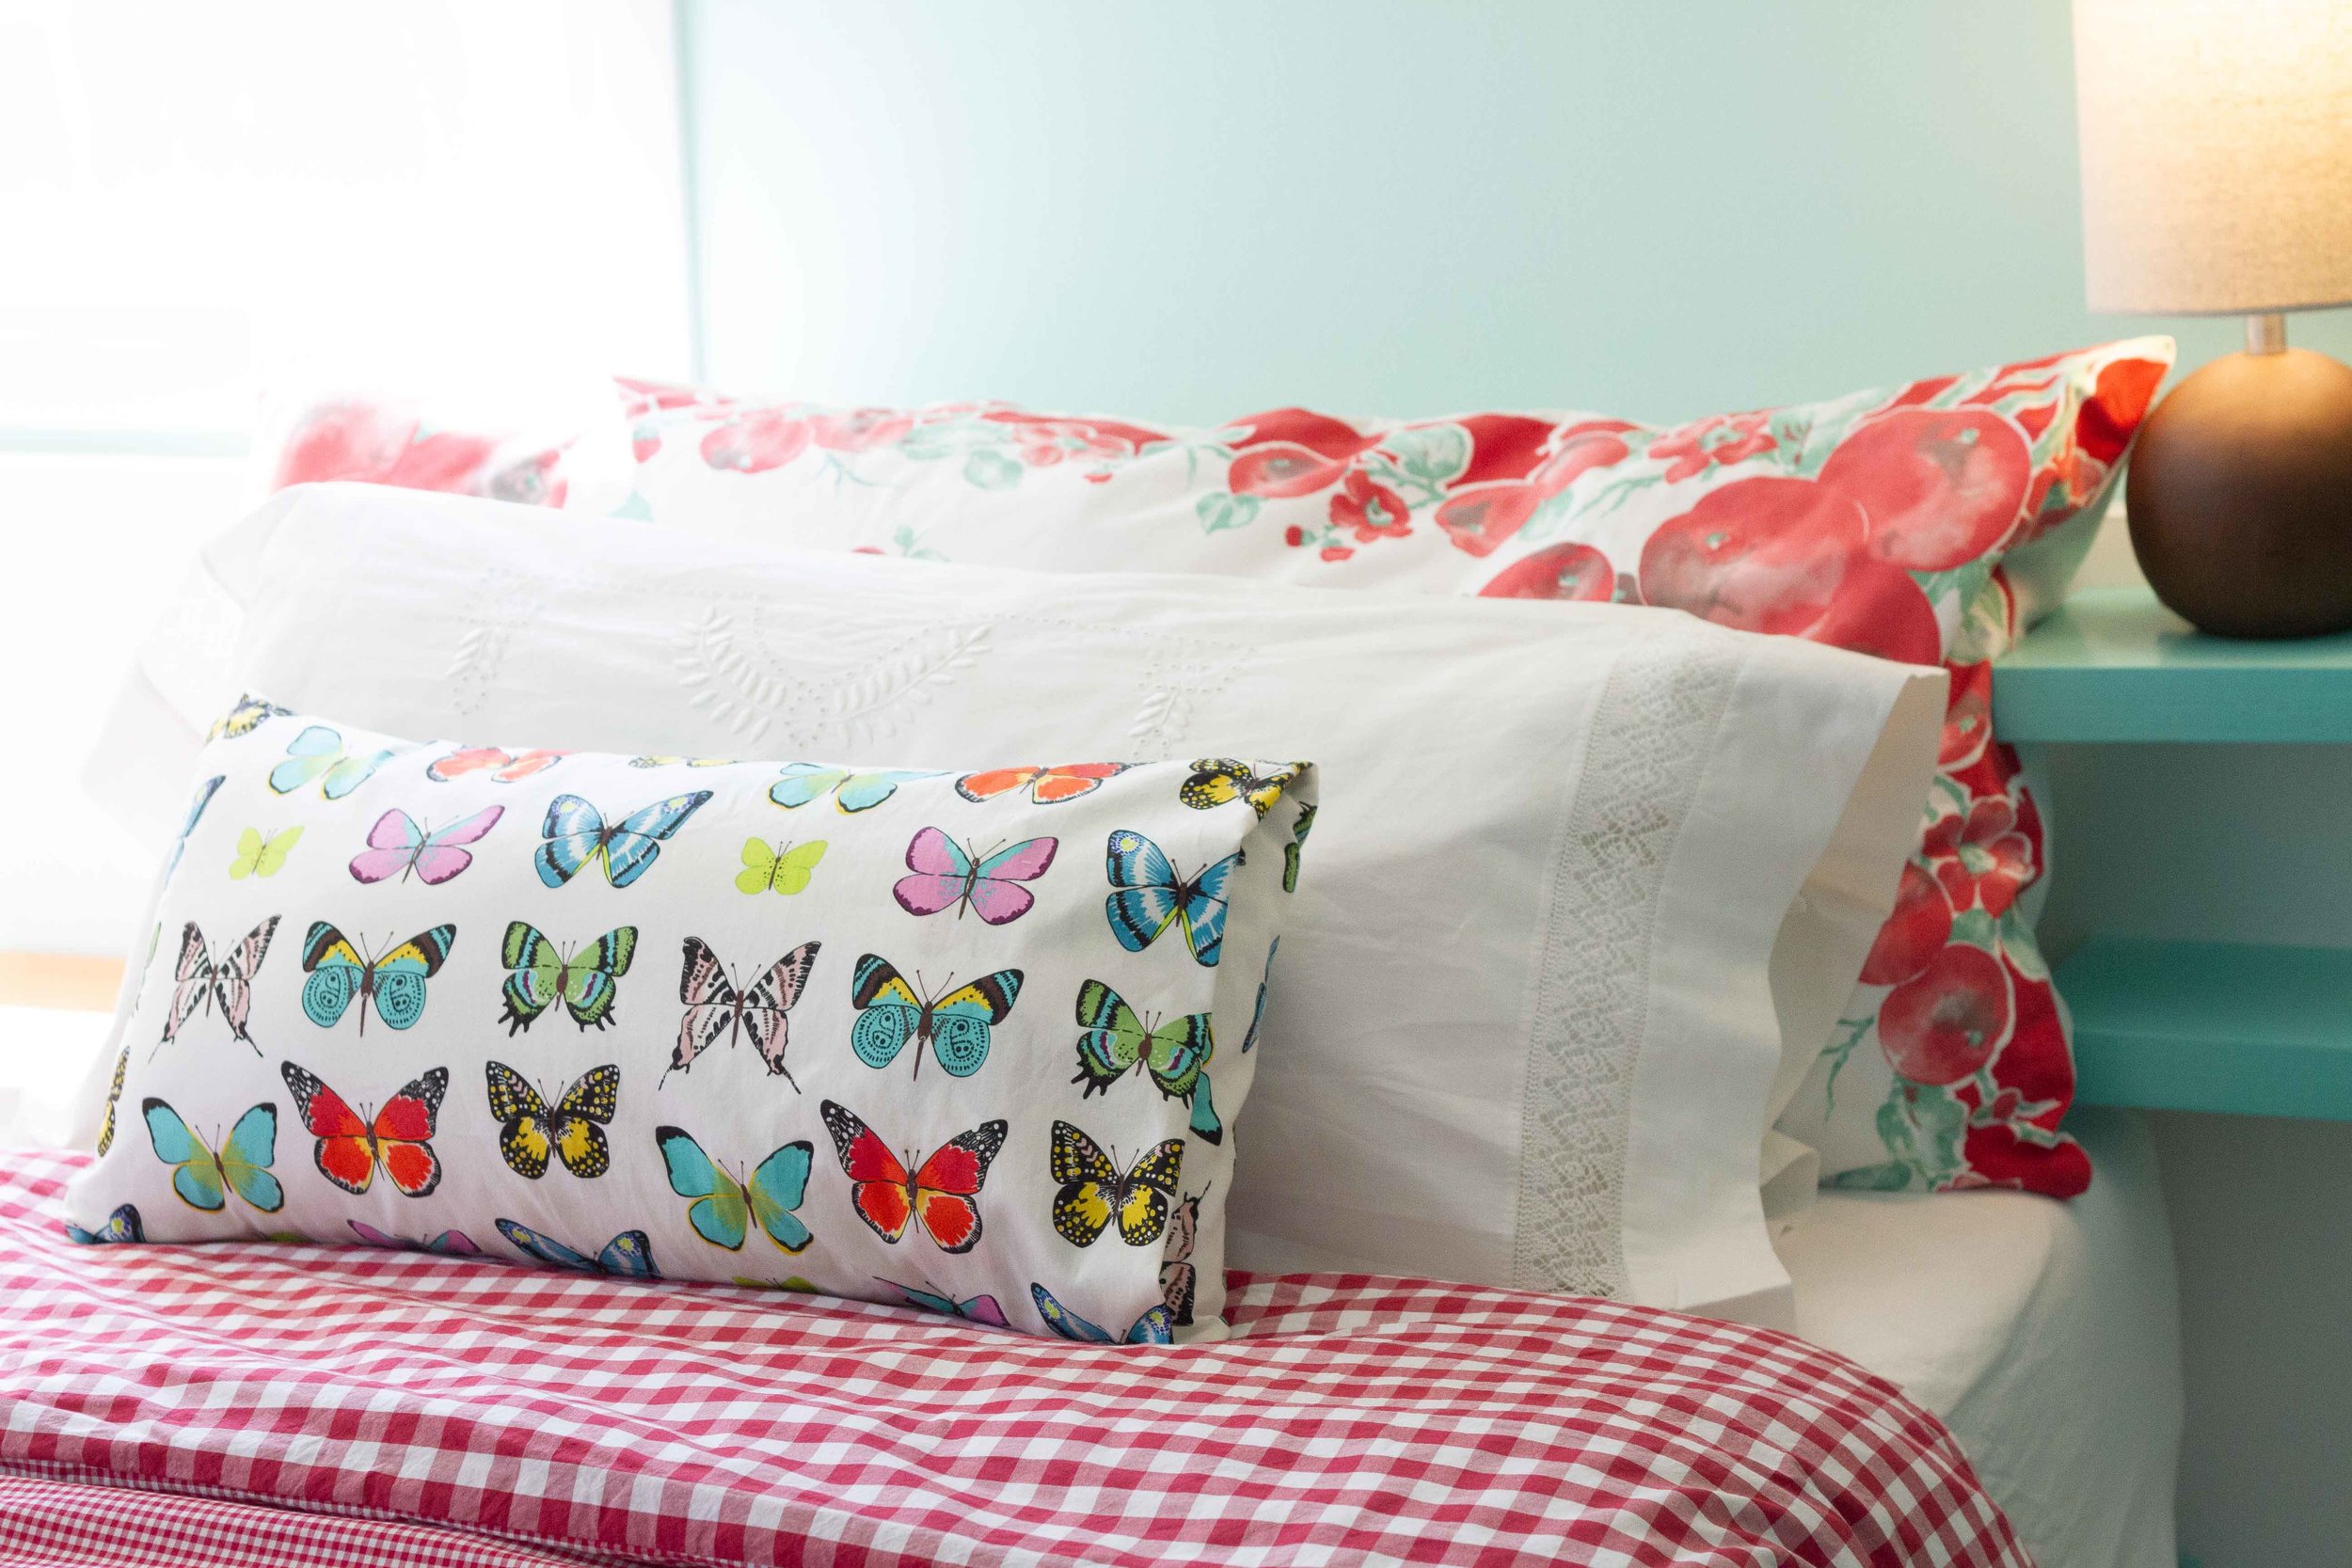 The Easiest Way To Put On A Duvet Cover, What Do You Use Inside A Duvet Cover